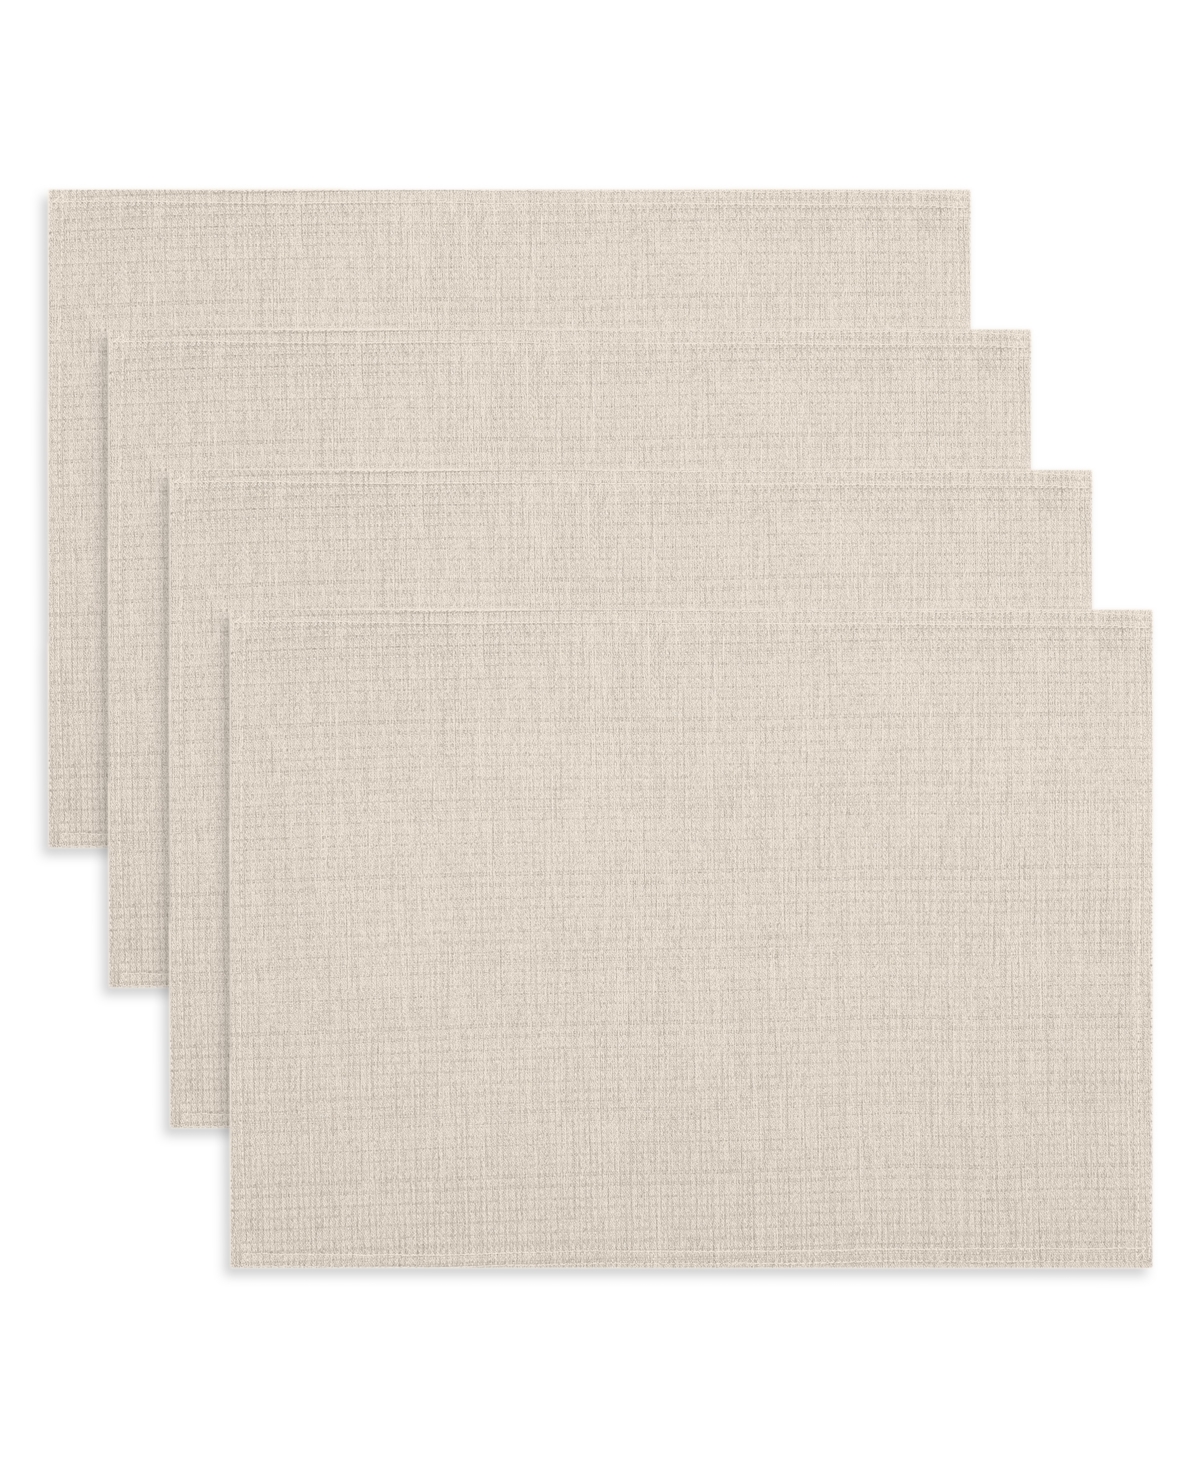 Noritake Colorwave Placemats, 4 Pack In Cream